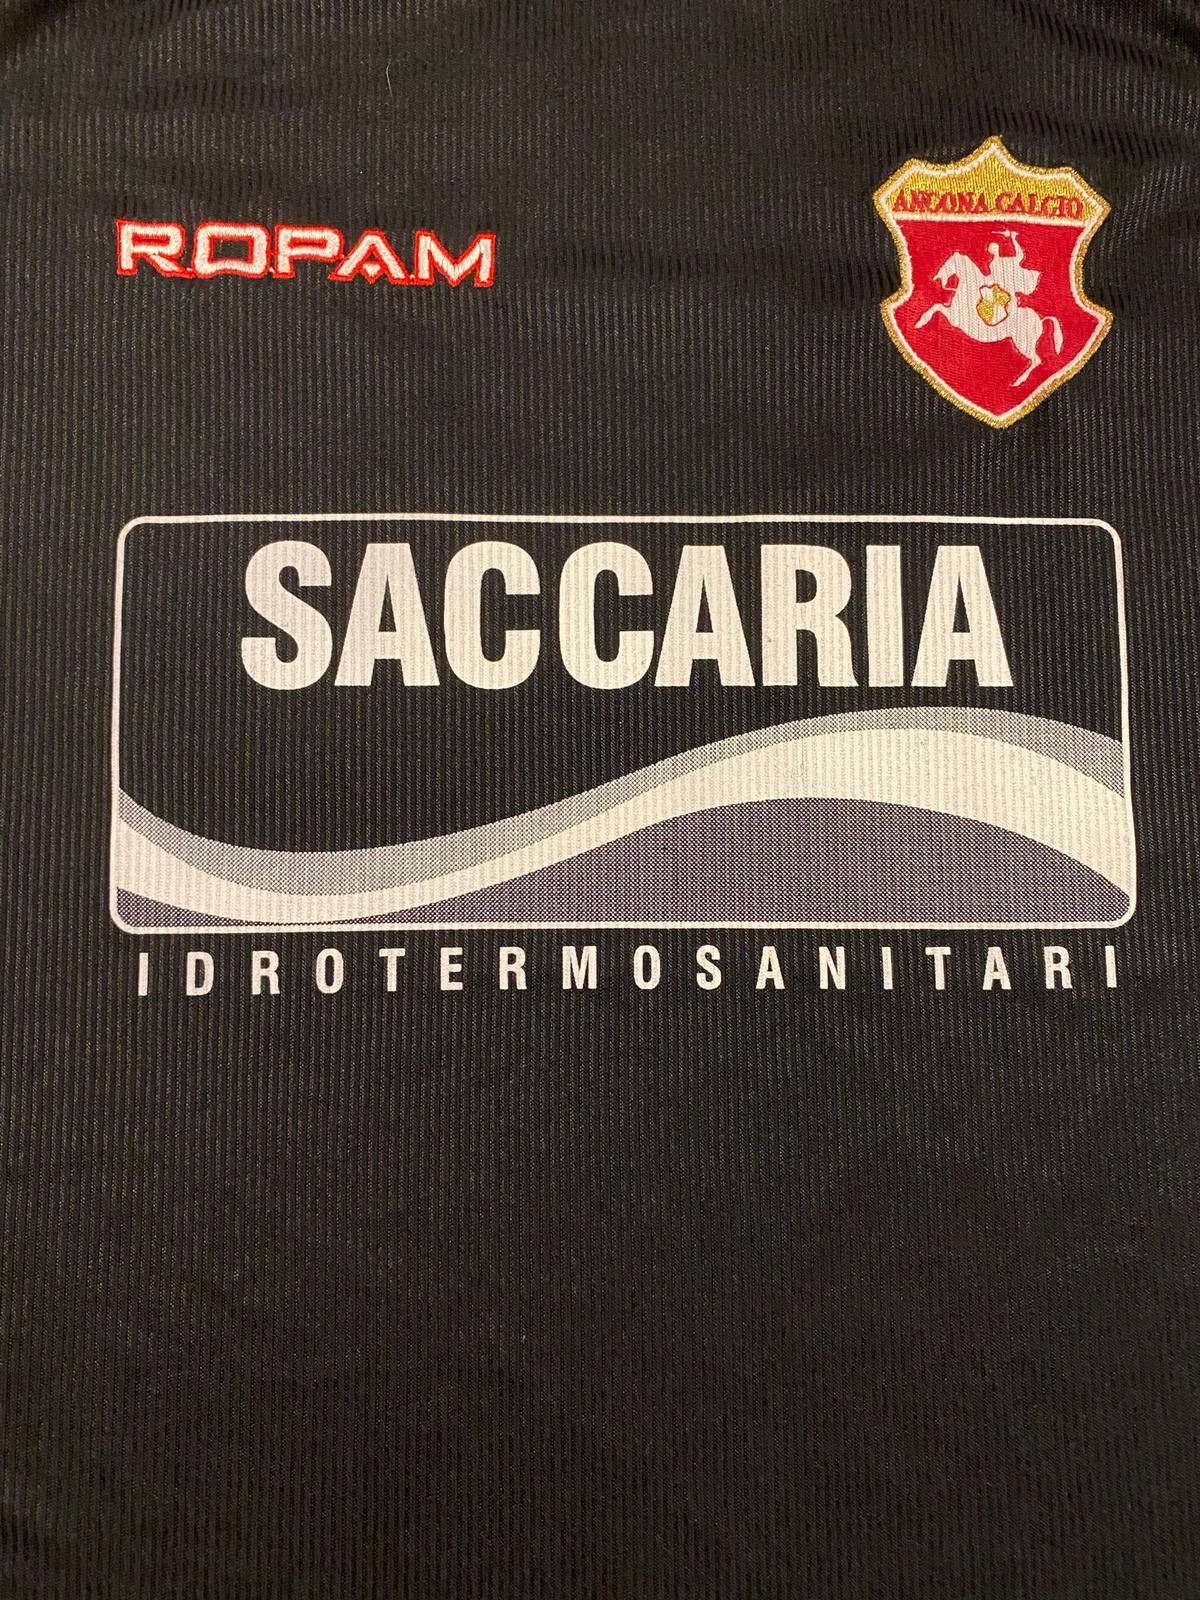 2001/02 Ancona *Player Issue* Maillot GK #12 (XL) 9/10